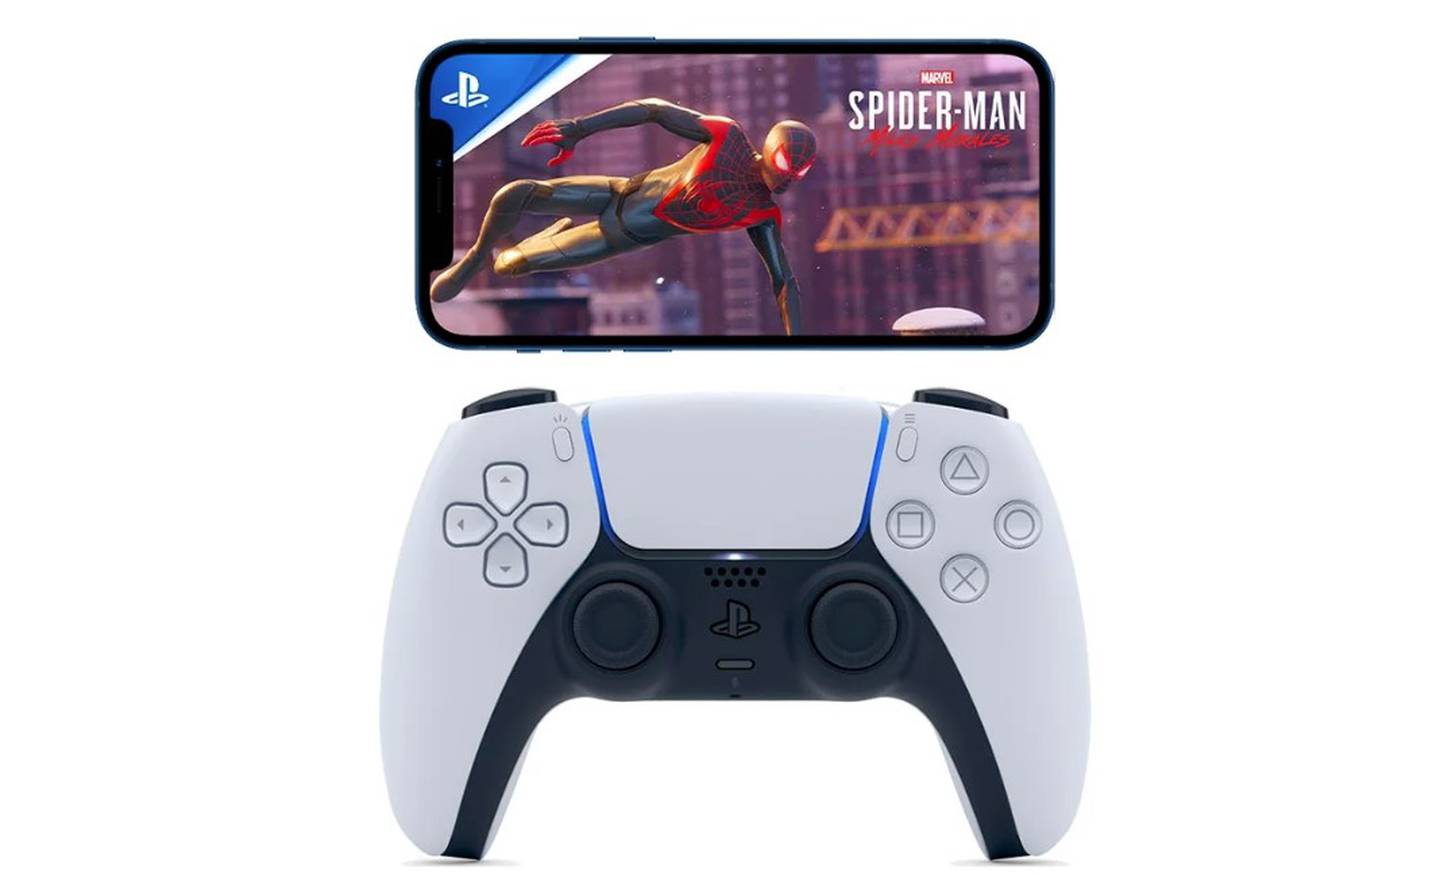 An image showing PS%'s DualSense under an iPhone displaying the Spider-Man: Miles Morales video game.